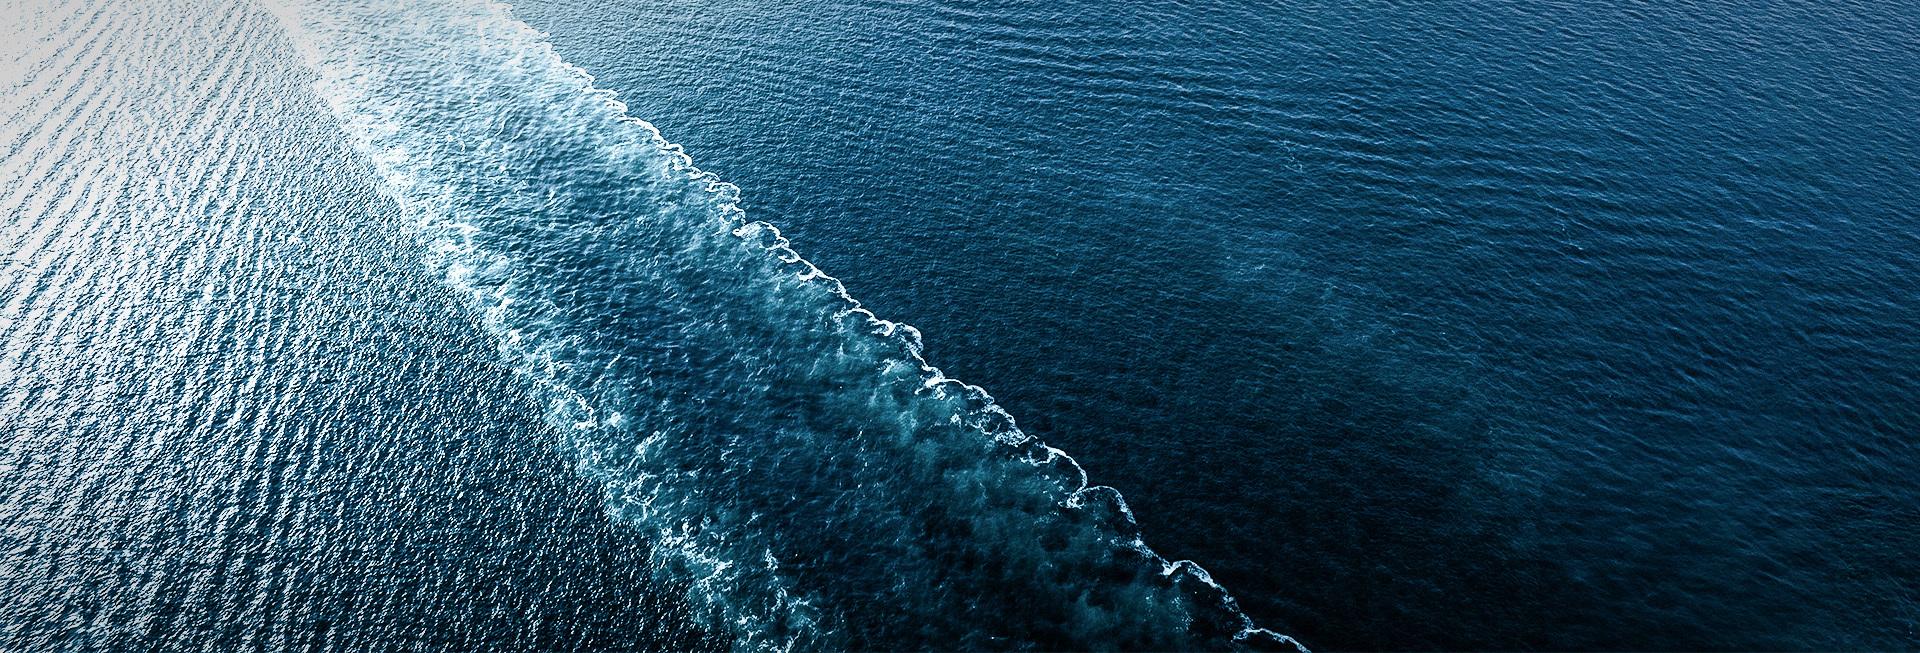 A sea with the wake of a passing ship in the water.